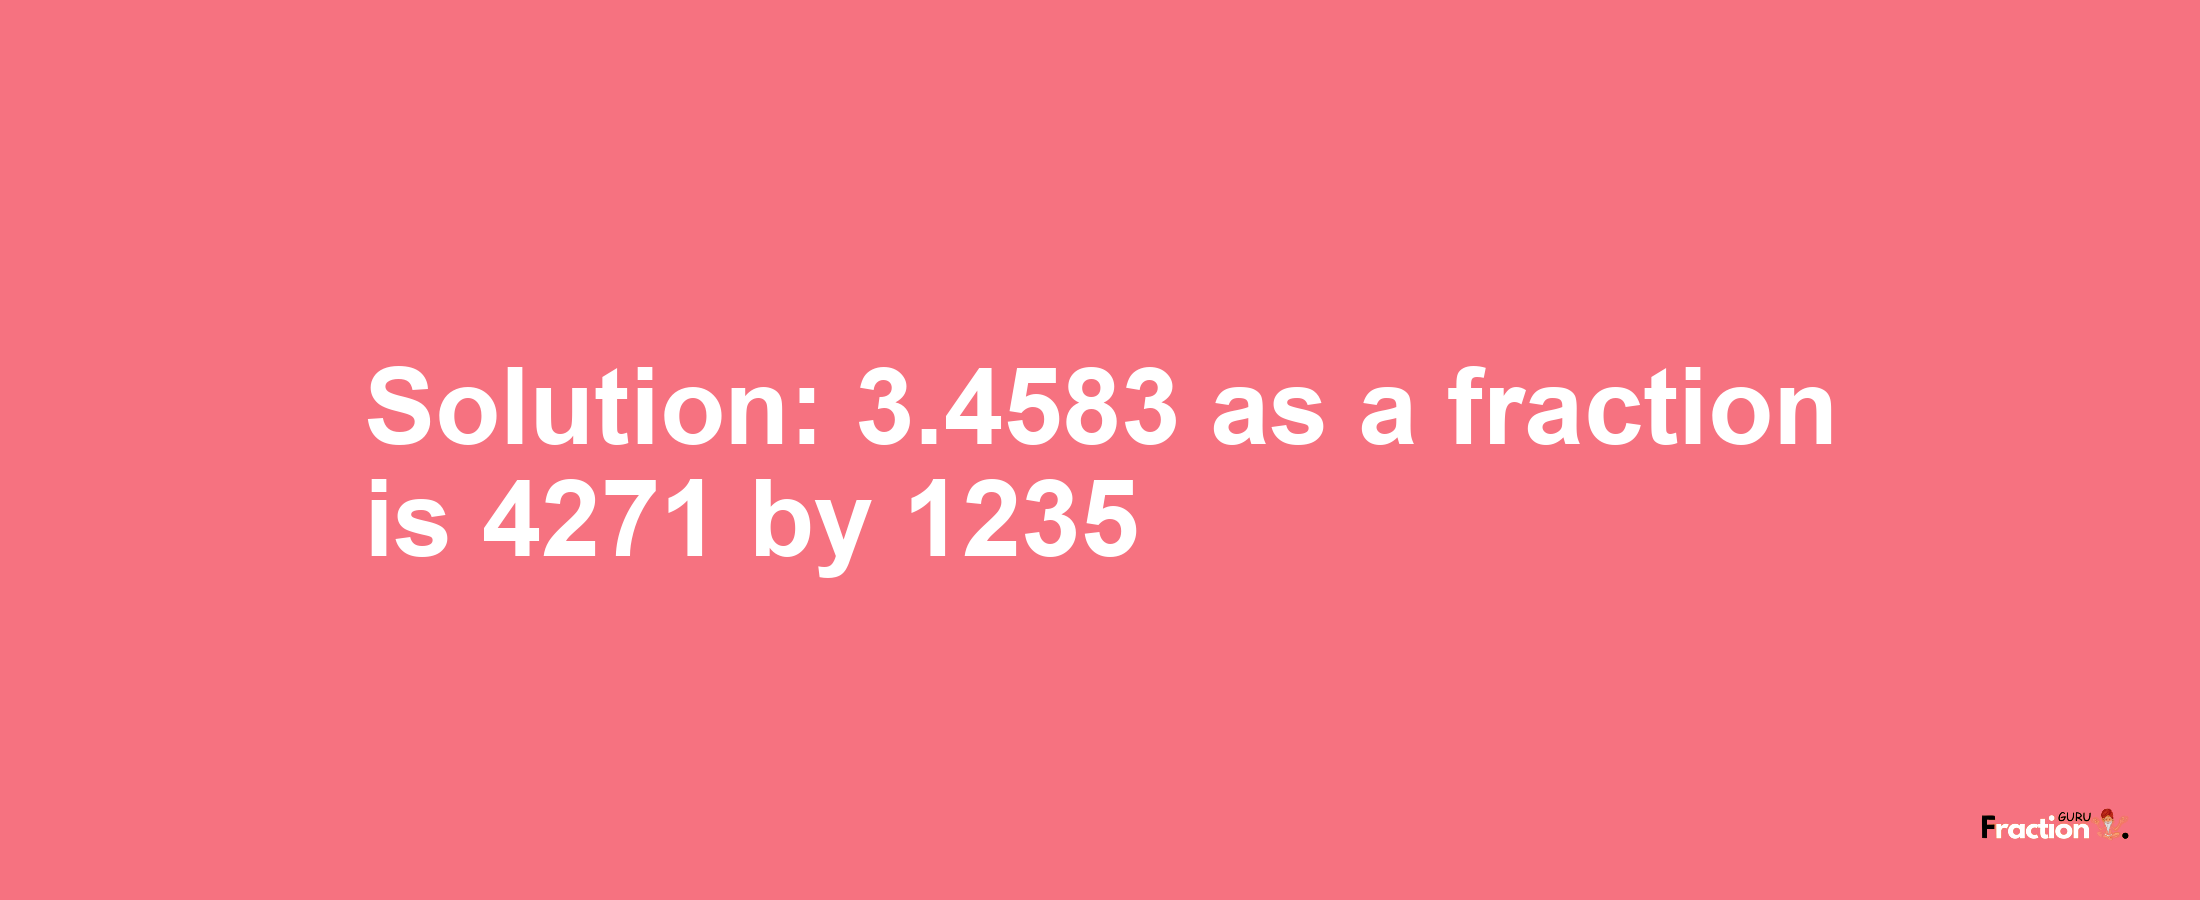 Solution:3.4583 as a fraction is 4271/1235